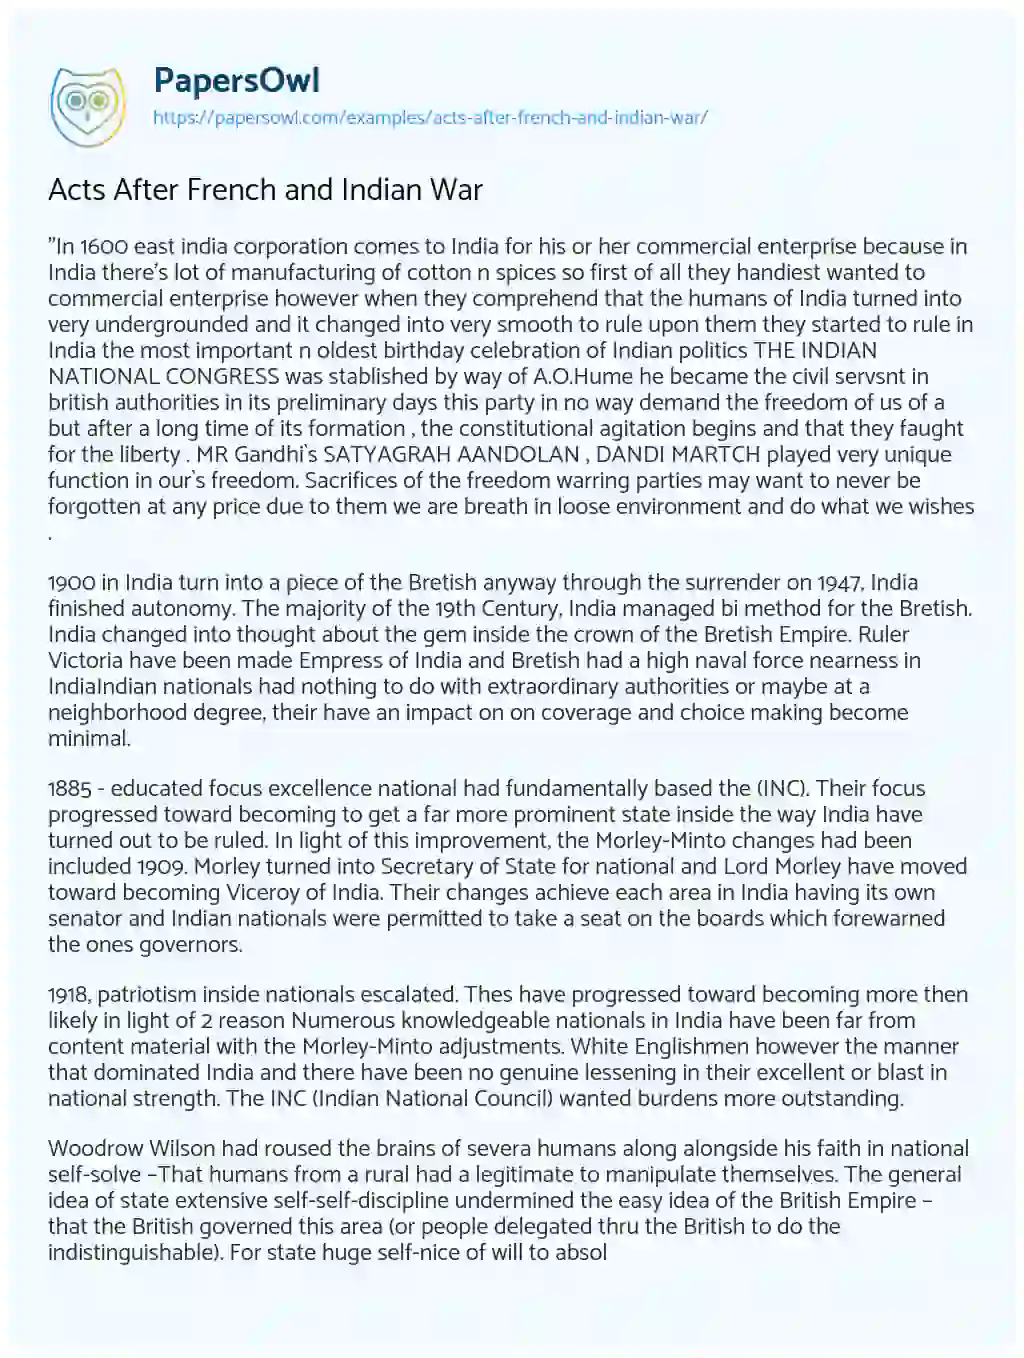 Acts after French and Indian War essay